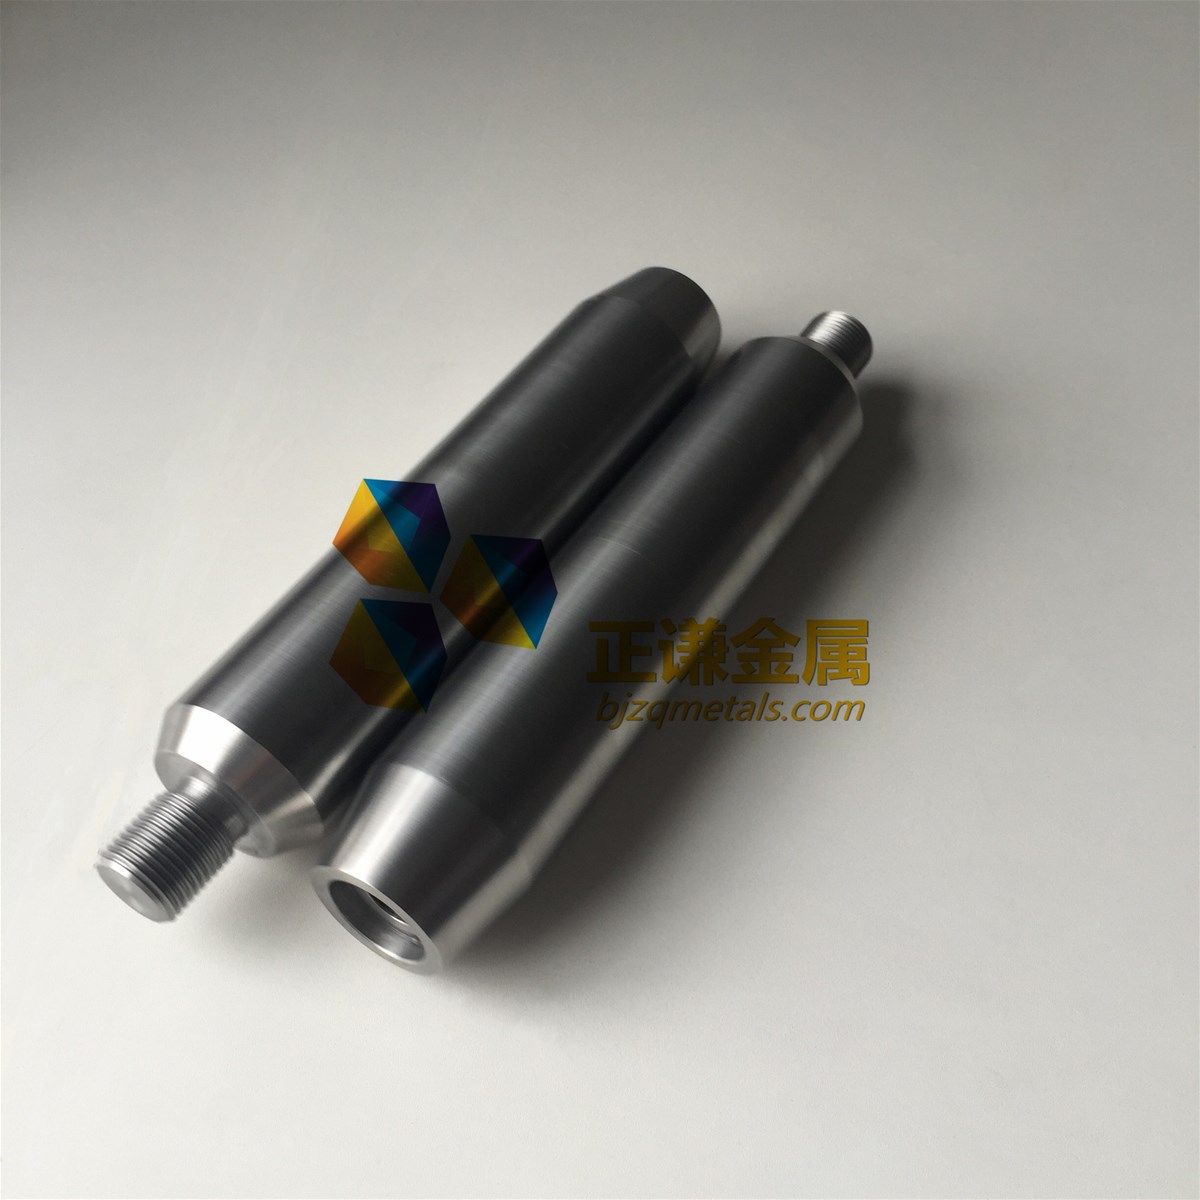 pure molybdenum electrode rod moly rod for glass melting